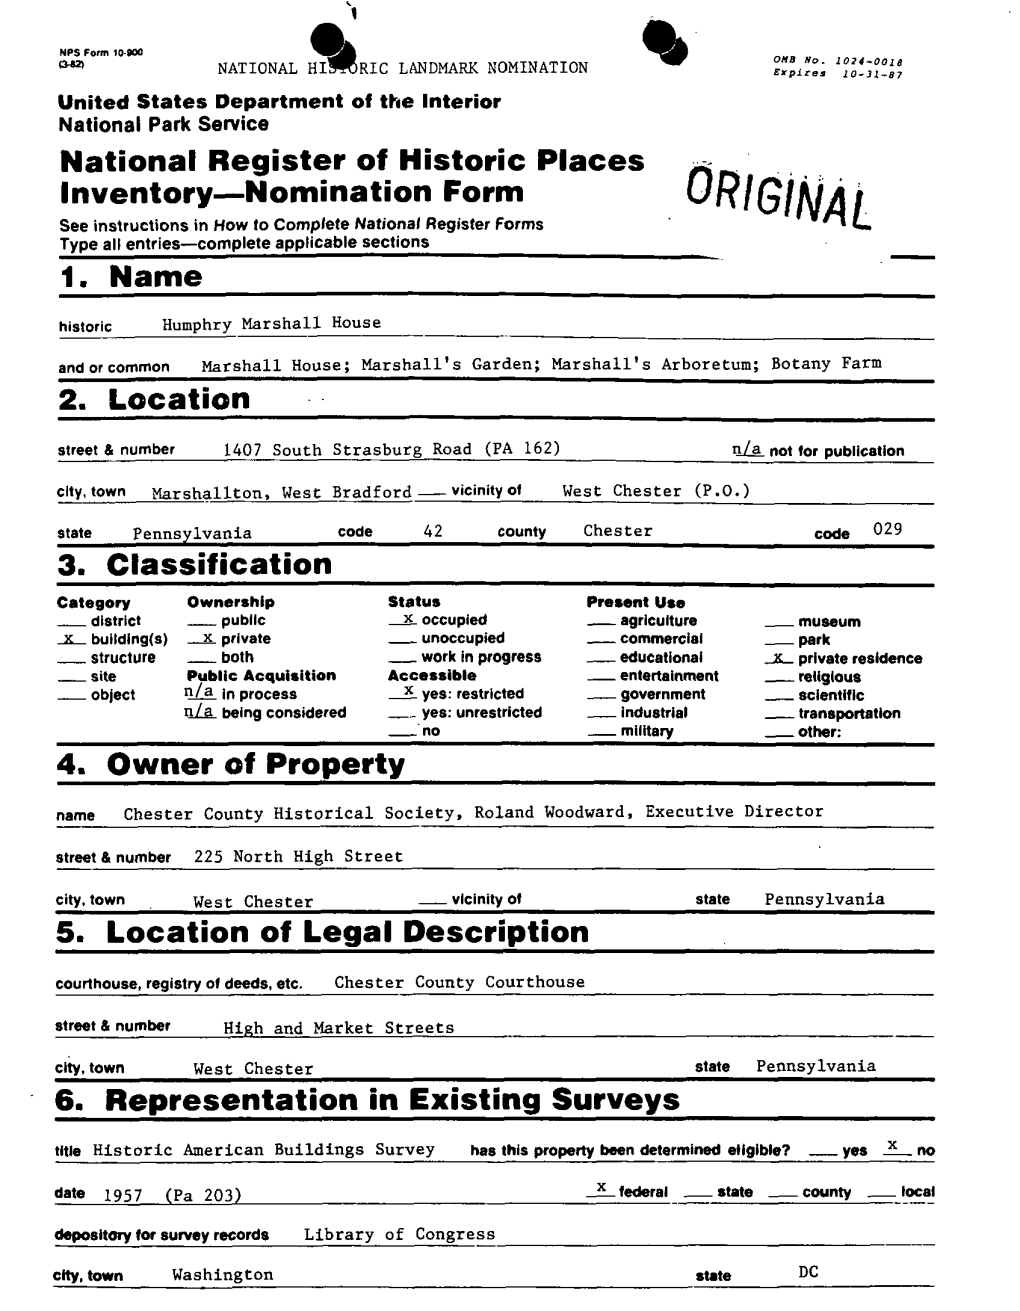 National Register of Historic Places Inventory — Nomination Form 3. Classification 4. Owner of Property 5. Location of Legal D